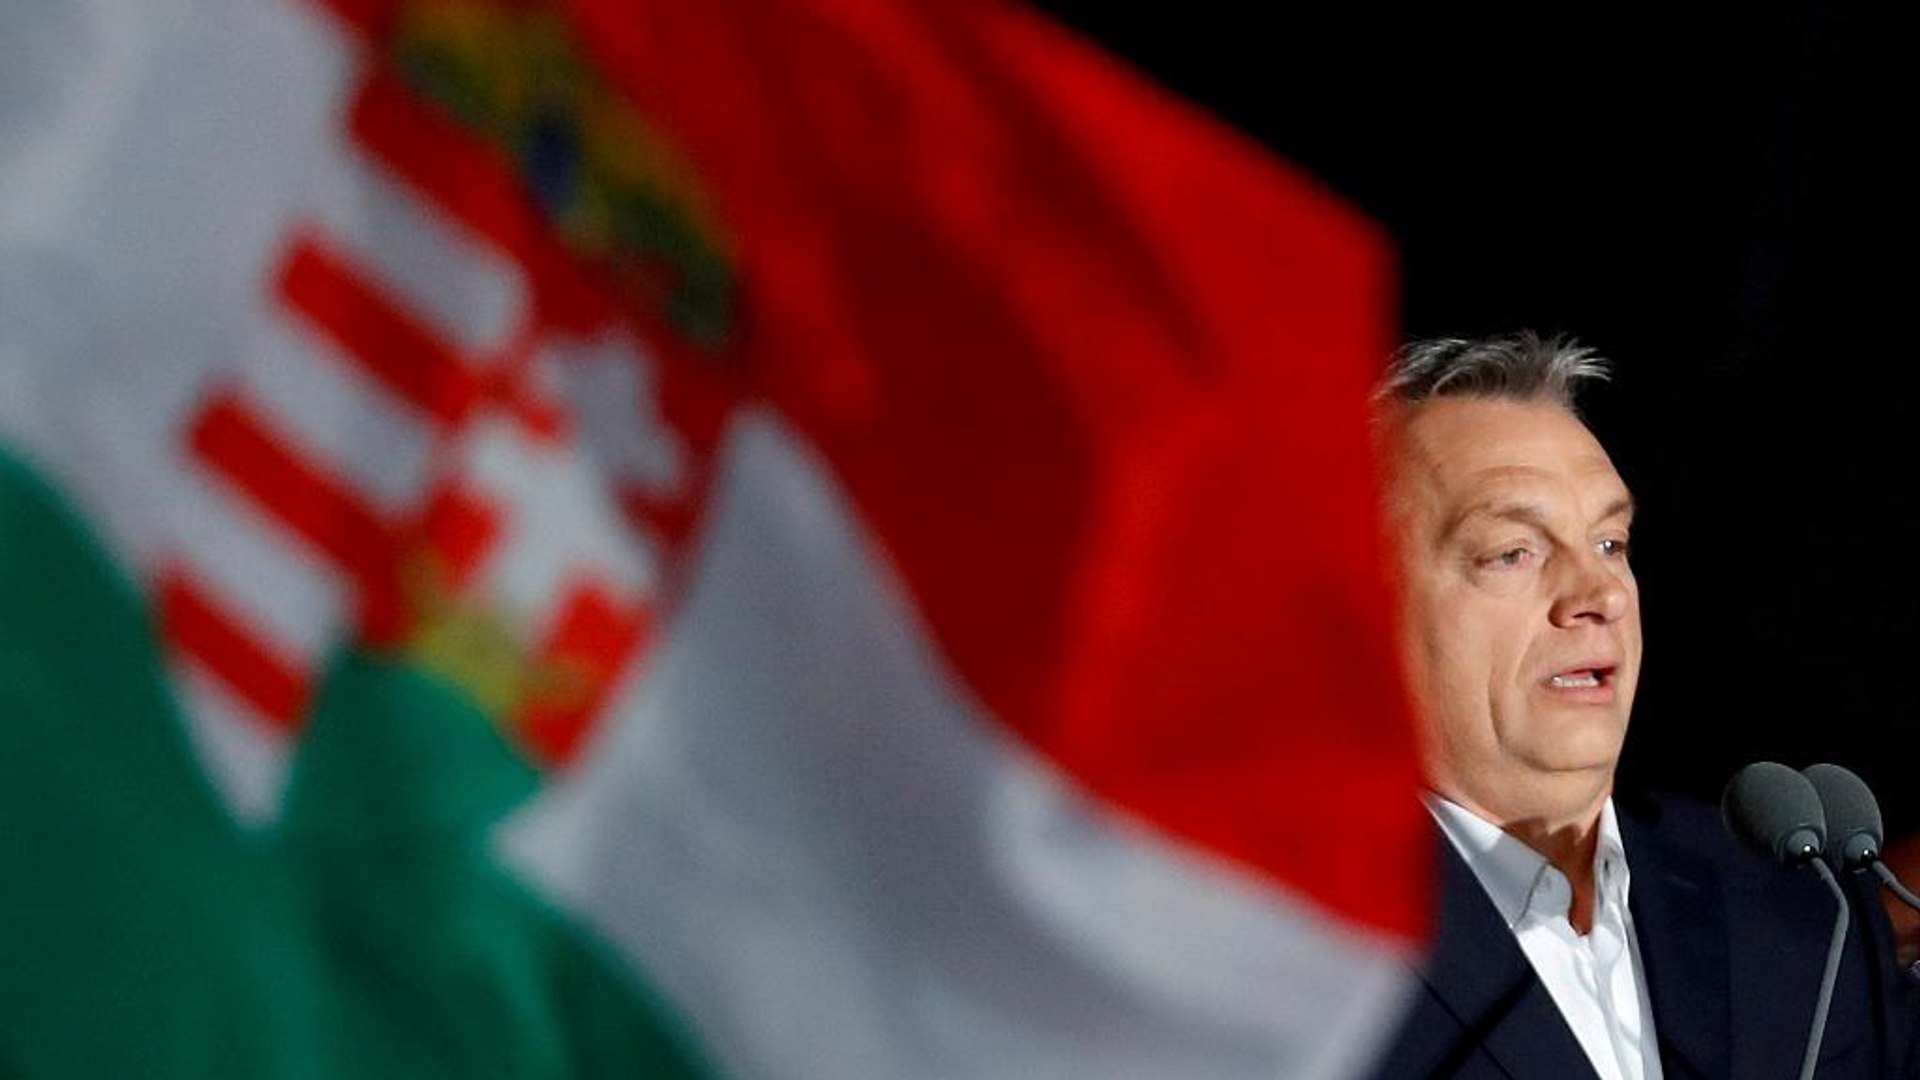 ⁣Hungary's Orban to tax aid groups which support migration